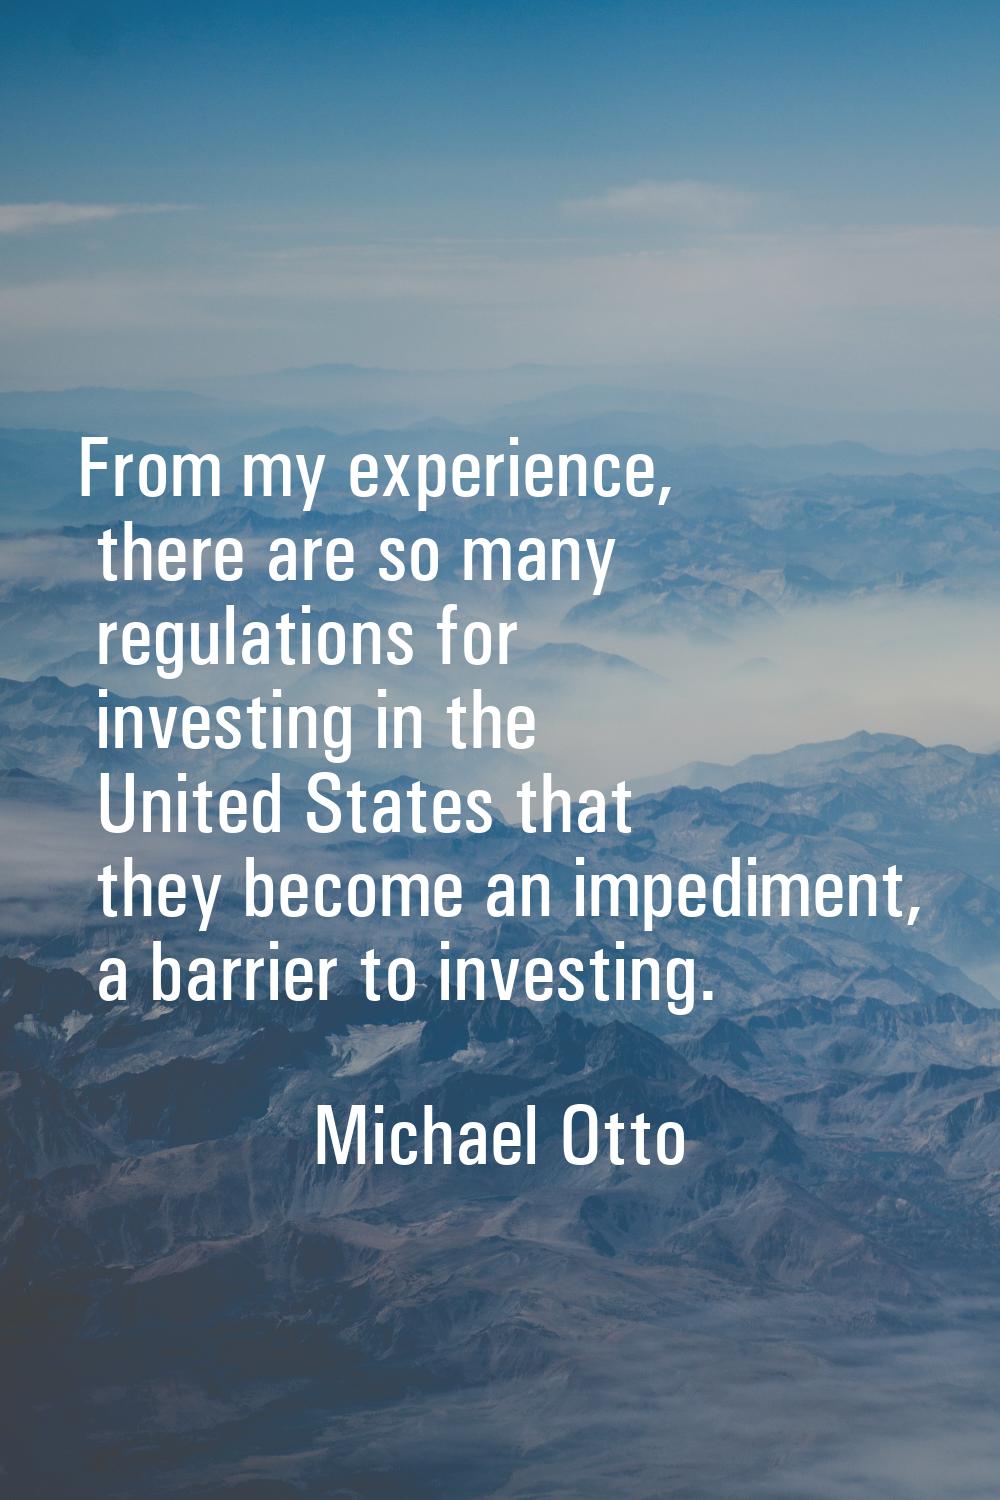 From my experience, there are so many regulations for investing in the United States that they beco